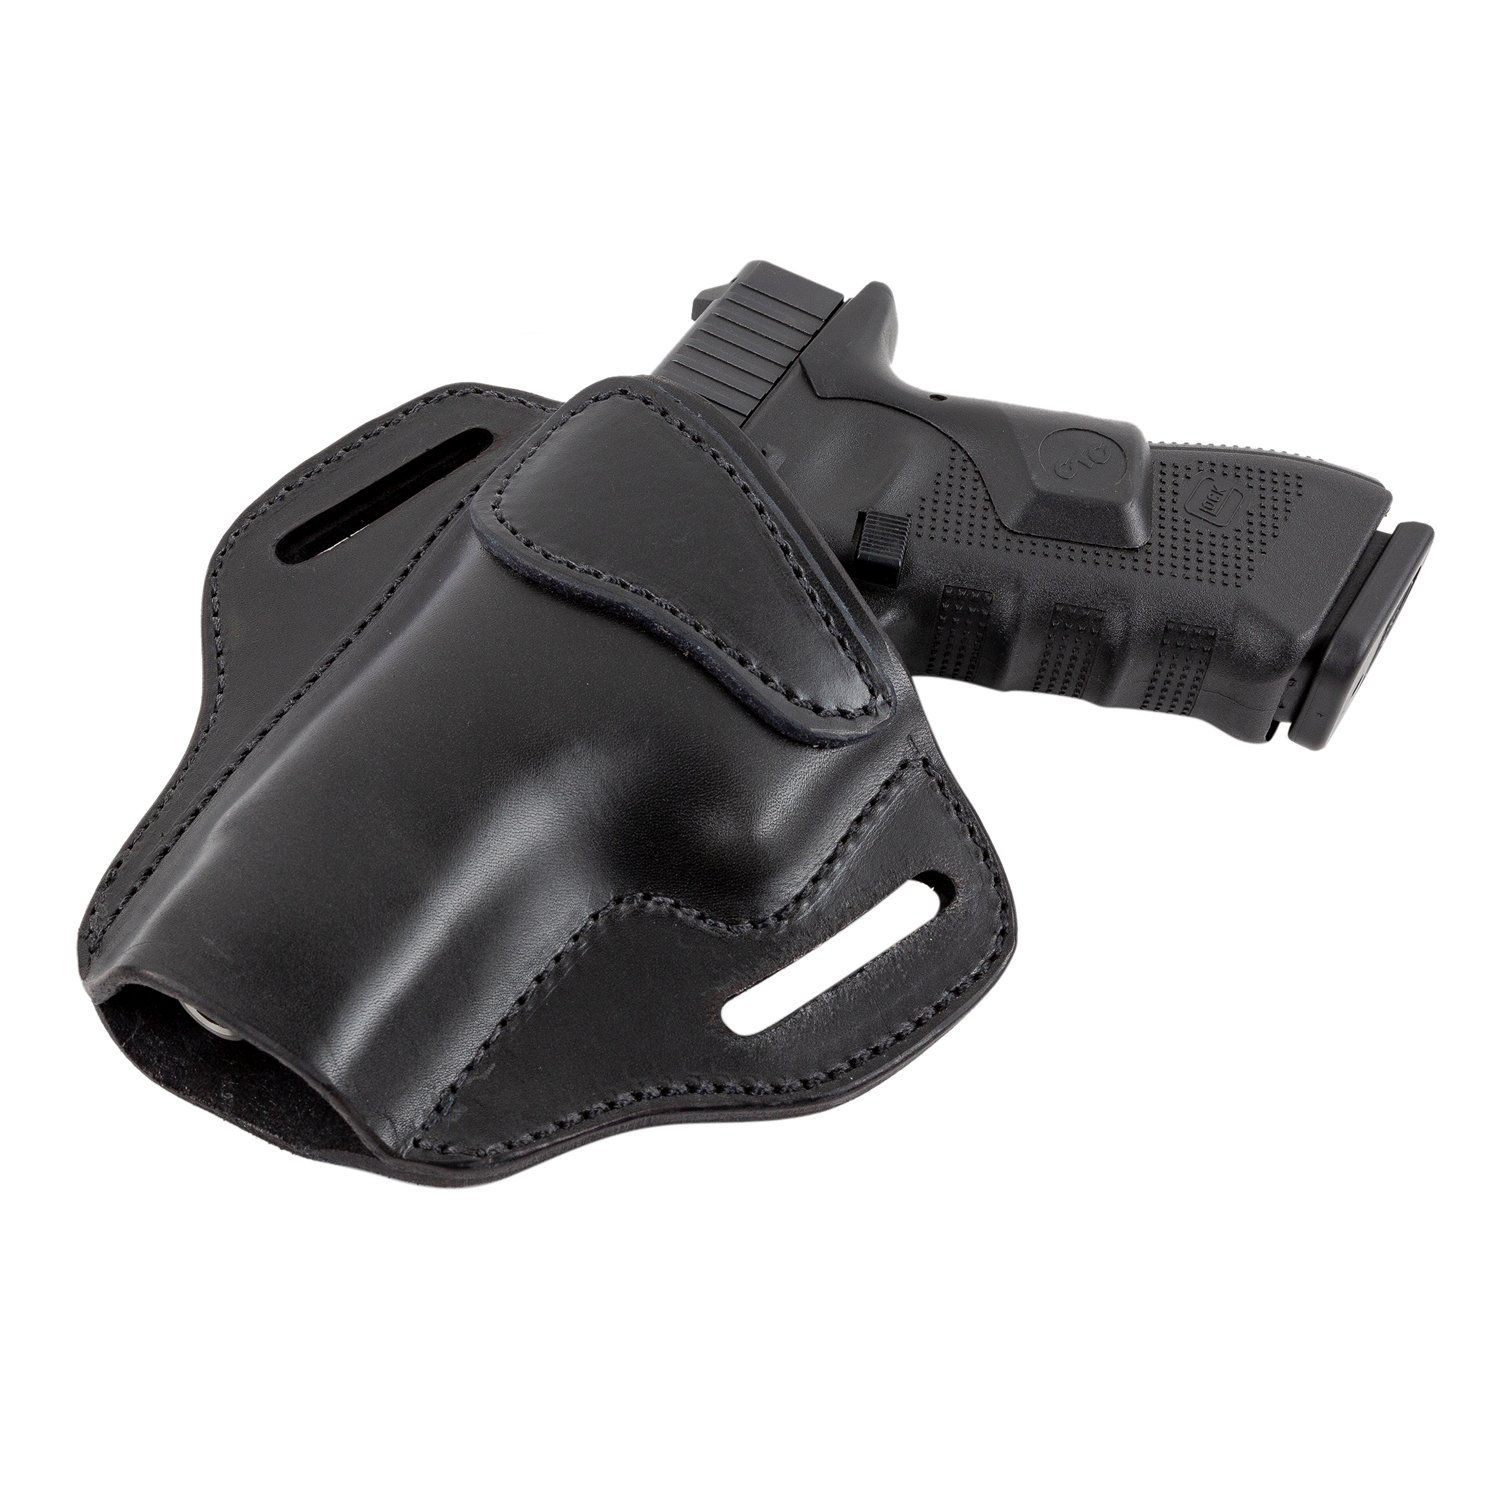 Glock 17 / 22 IWB Leather Holster - Lifetime Warranty - Made in U.S.A.